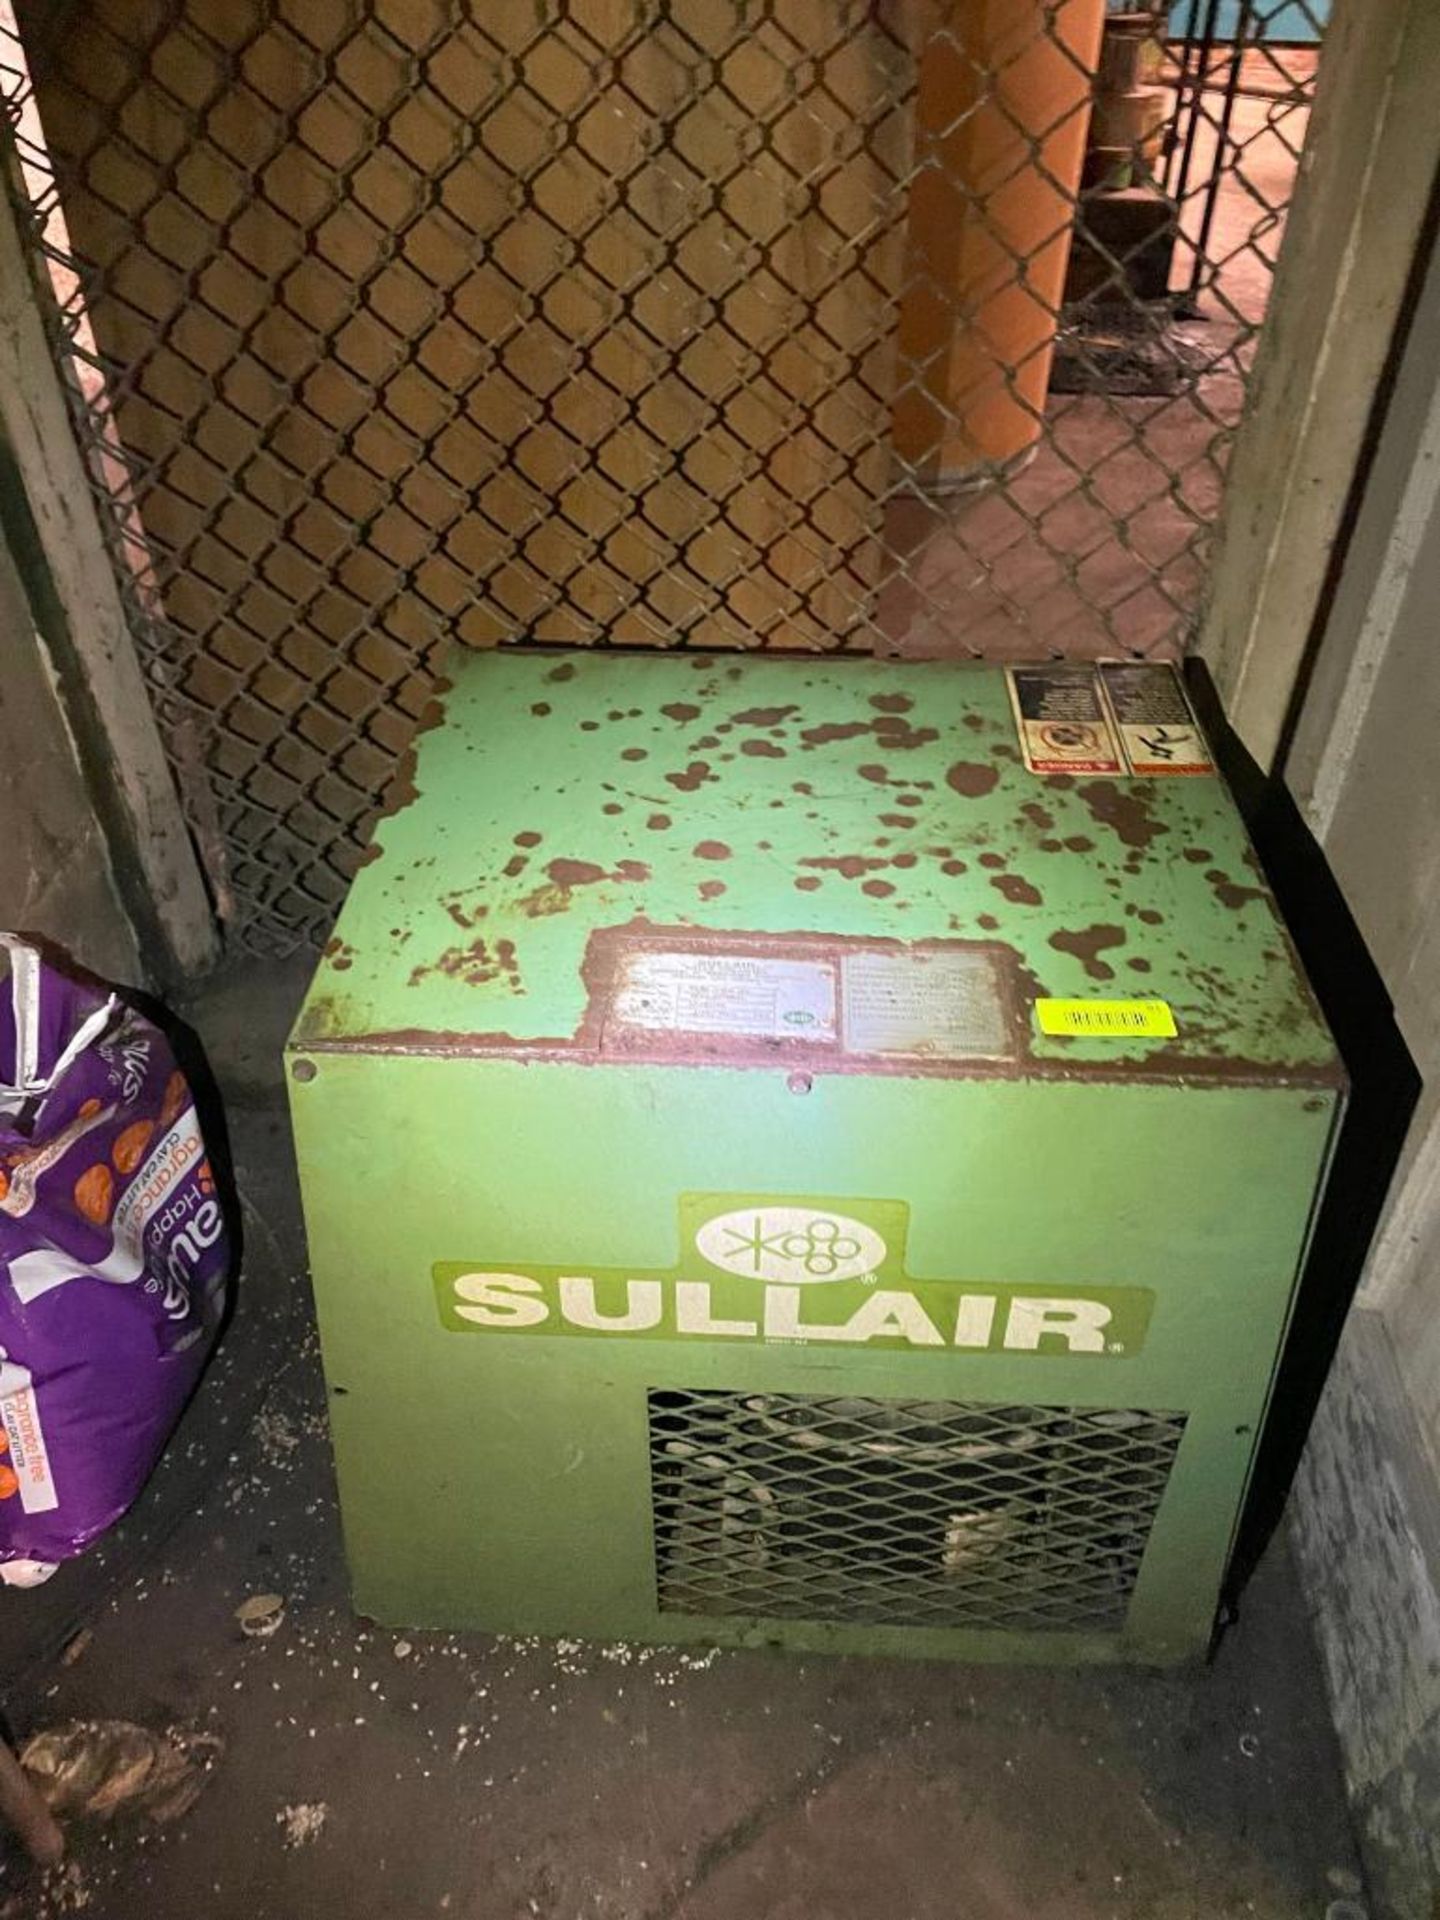 SULLAIR SRD-105 AC REFRIGERATED DRYER BRAND/MODEL: SULLAIR SRD-105-AC LOCATION BASEMENT QTY: 1 - Image 3 of 3